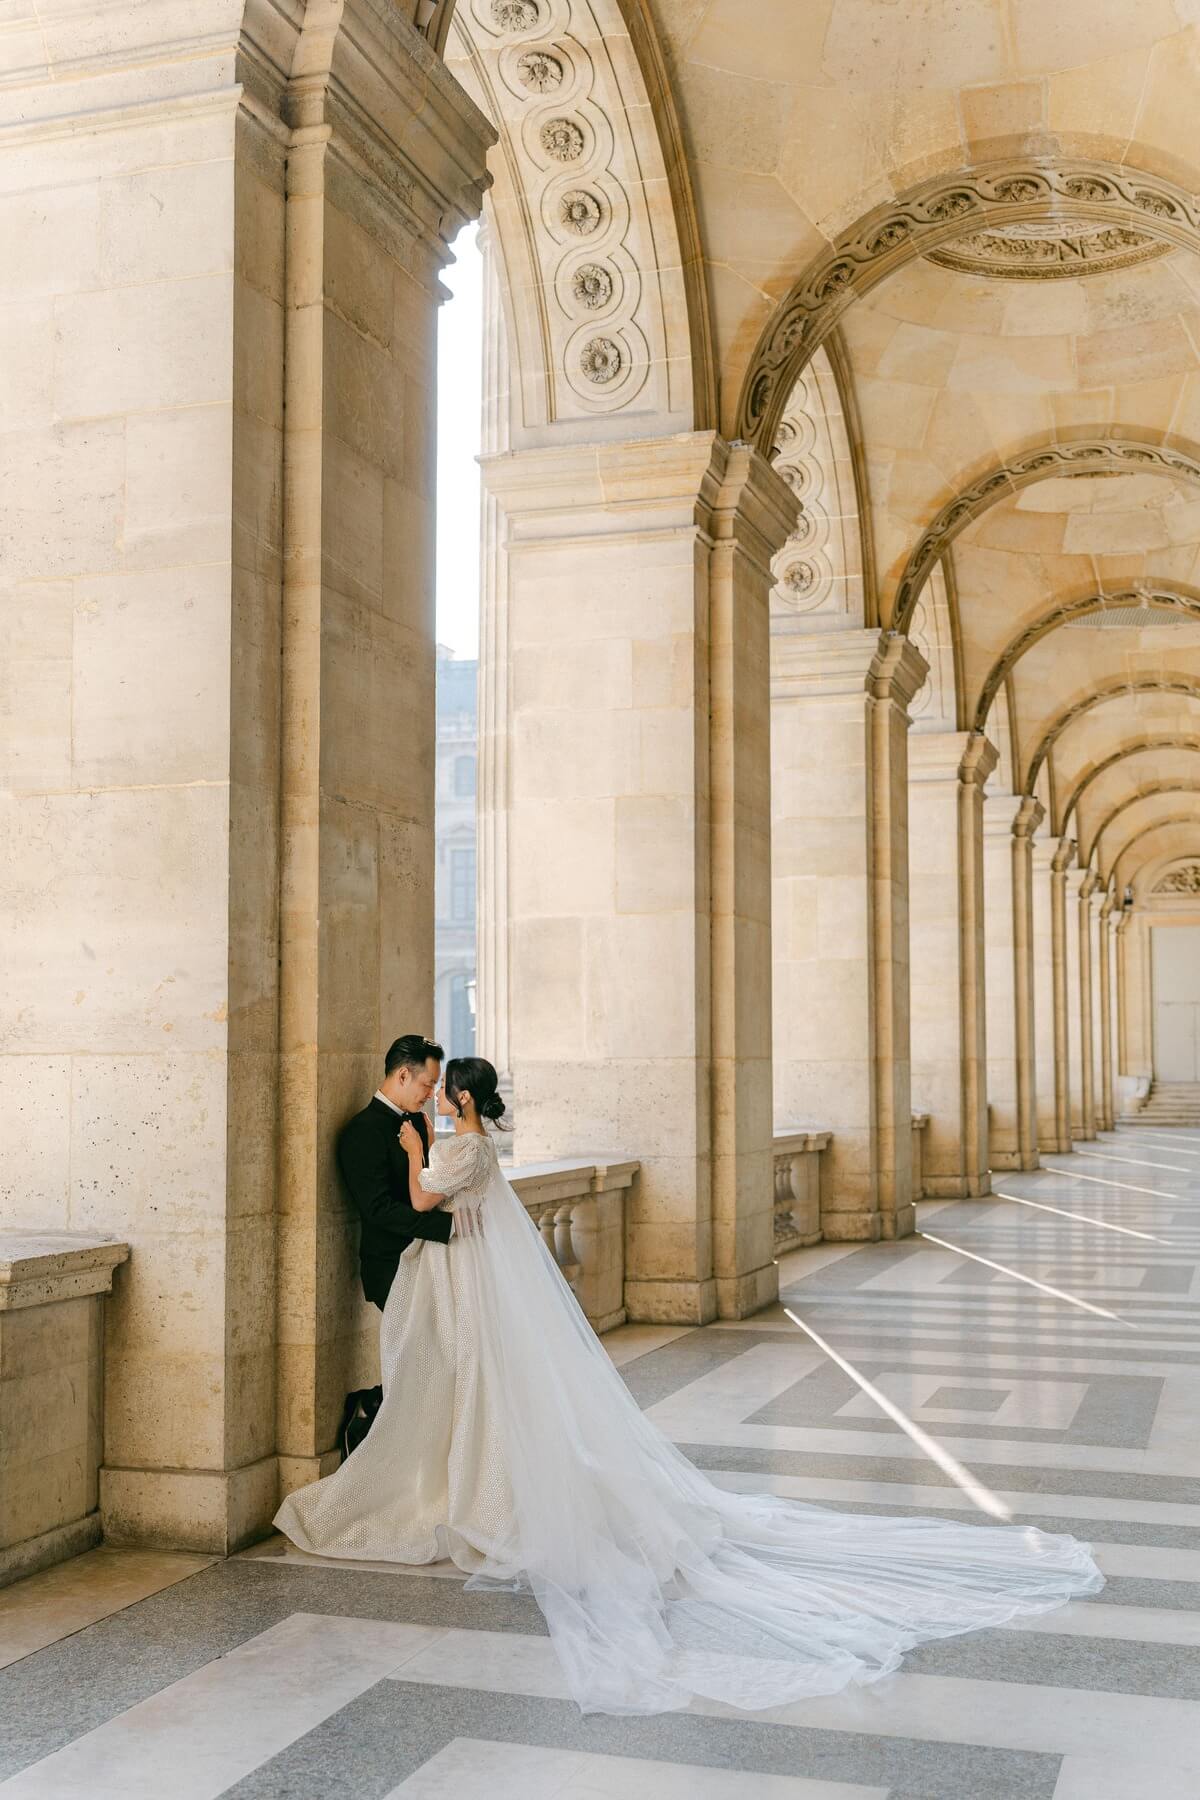 A bride and groom stand tenderly together in a romantic pose under the historic arches of the Louvre in Paris, surrounded by dramatic architecture and natural light.